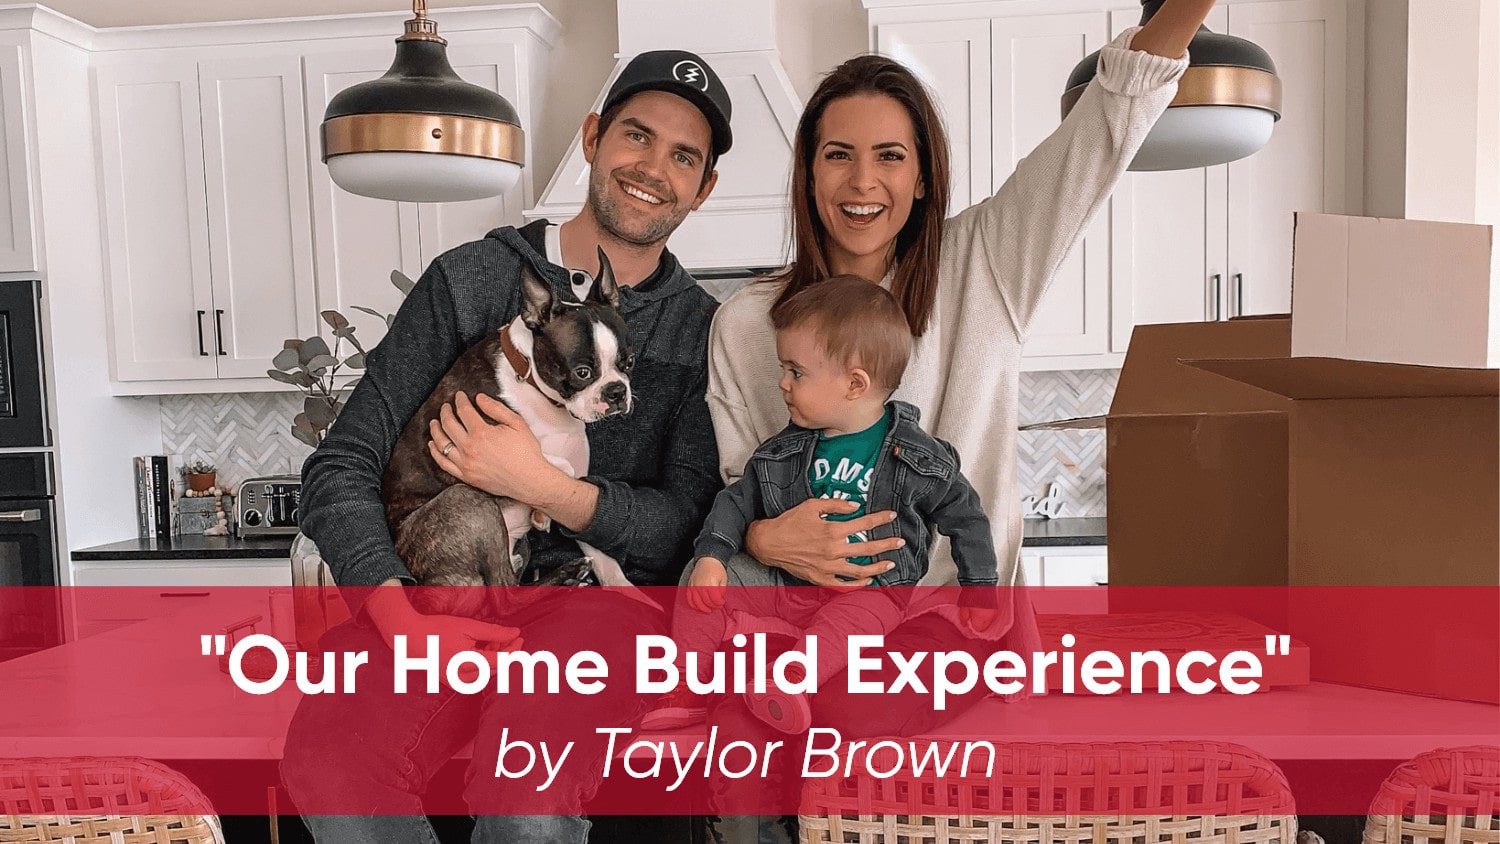 Our Home Build Experience by Taylor Brown